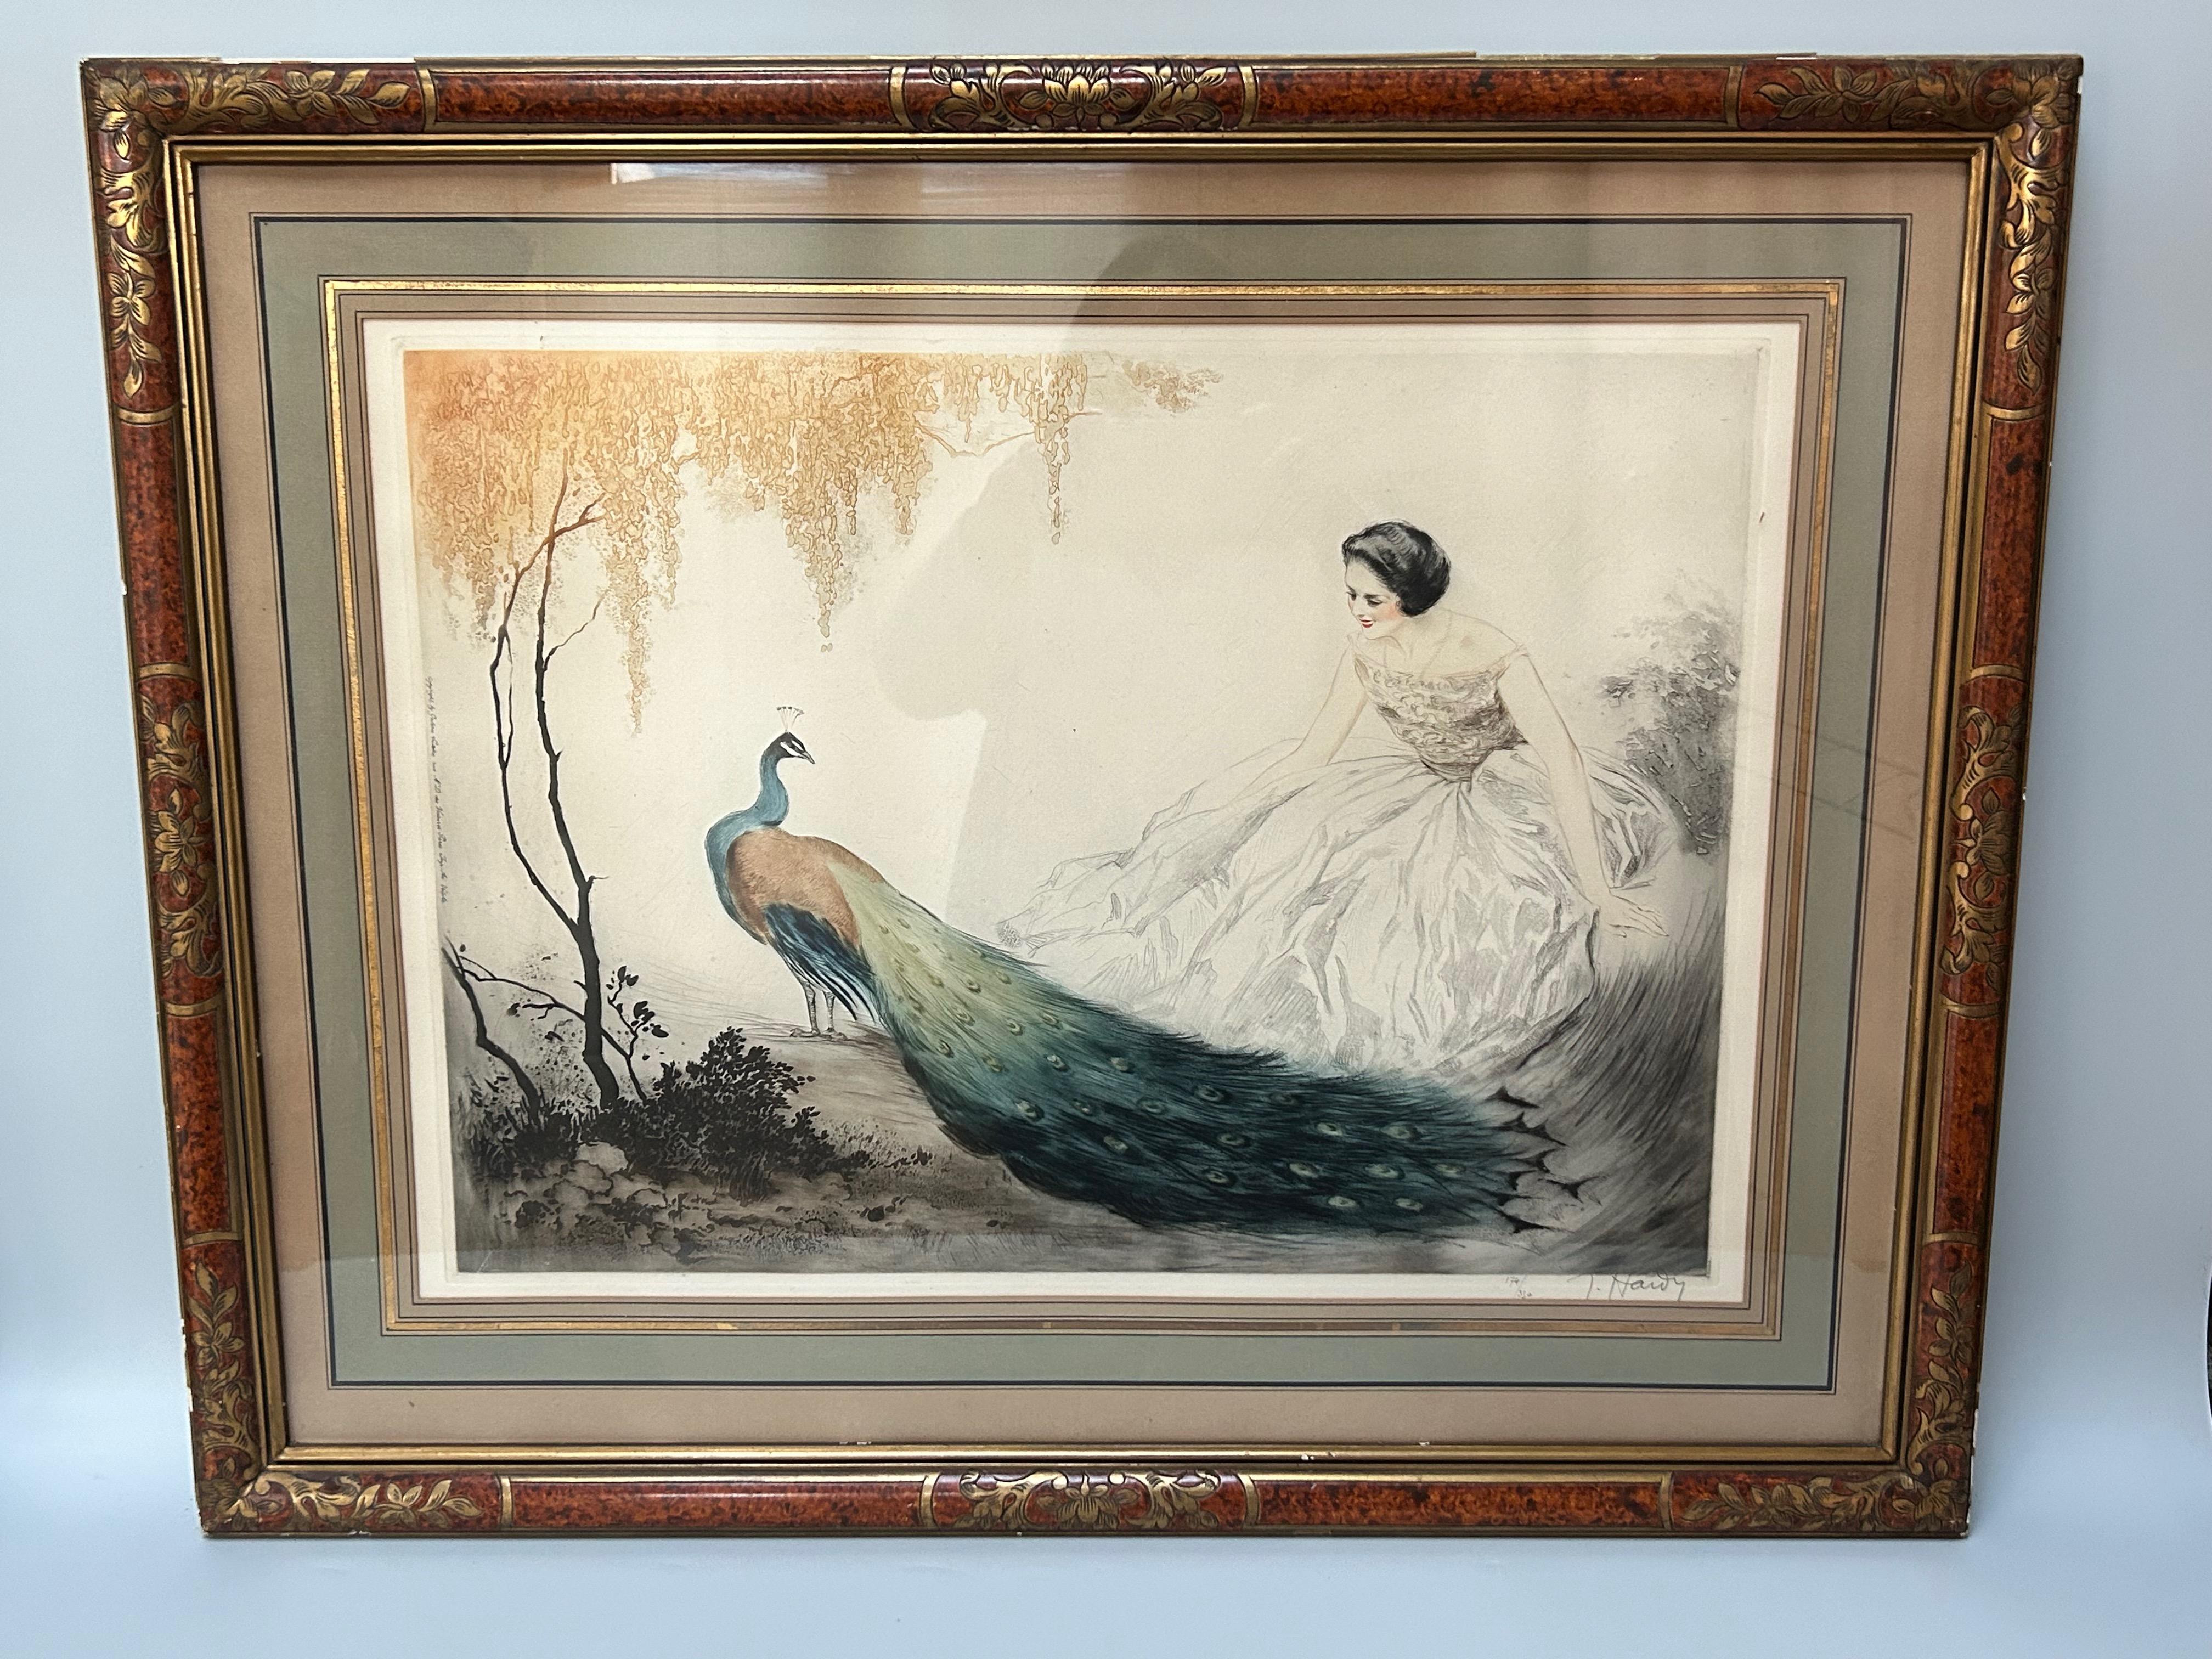 Art deco engraving circa 1925.
Elegant peacock.
Signed Jean Hardy, French engraver, decorator and illustrator from the circle of the famous Art Deco artist, Louis Icart.
Numbered 174/350
Original frame with small chips and losses.

Total height: